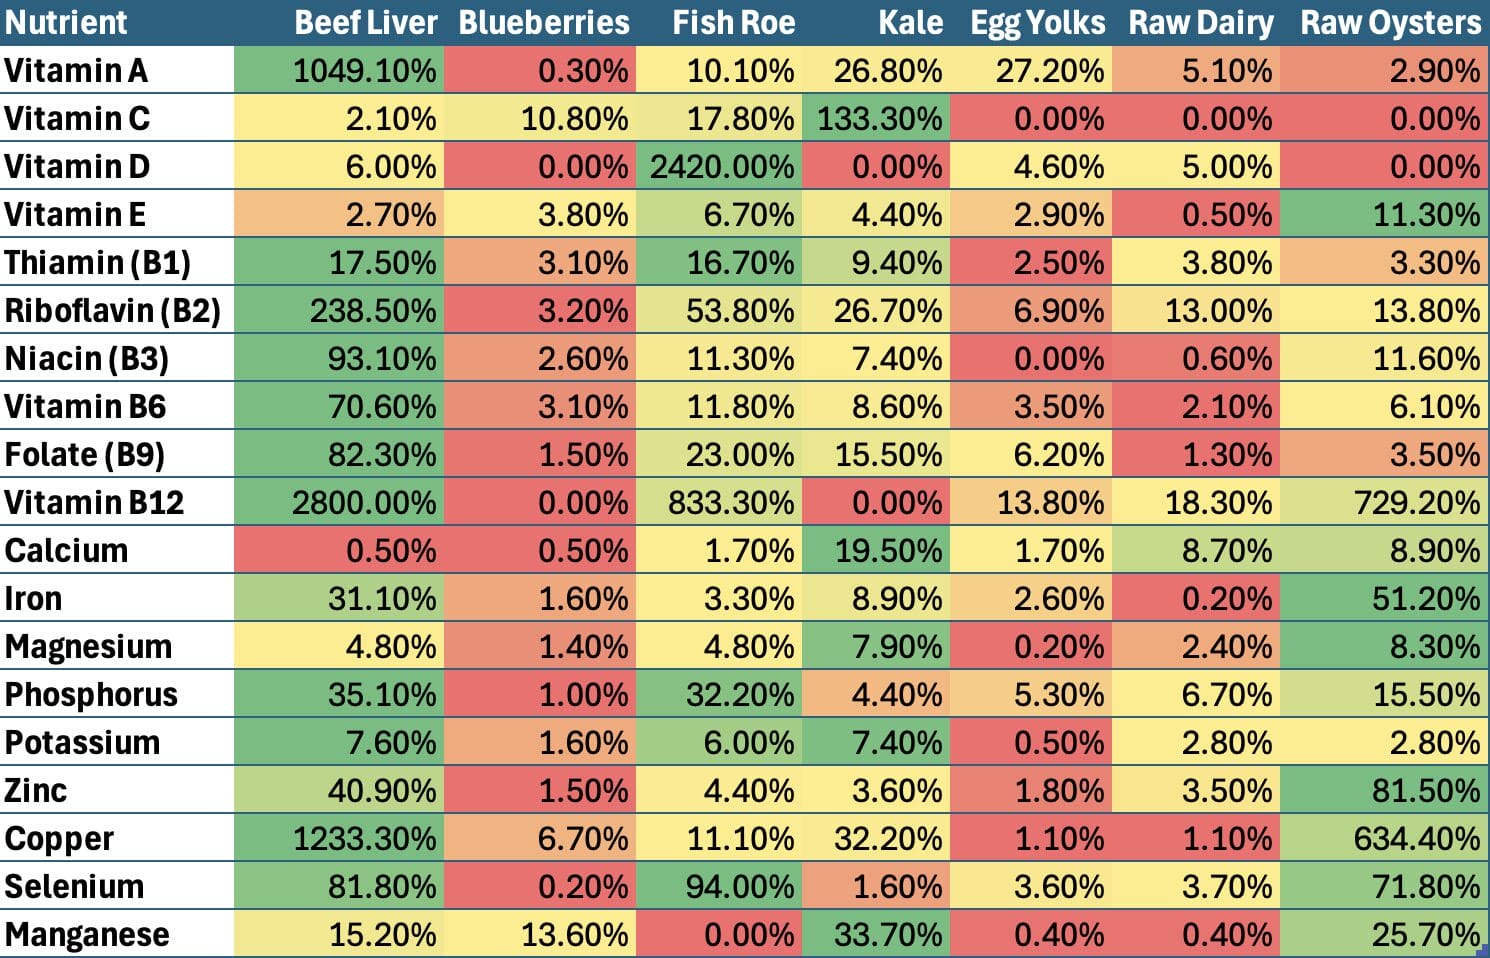 The table above compares beef liver to other superfoods. The numbers are normalized based on the bioavailability of the nutrient in each food.